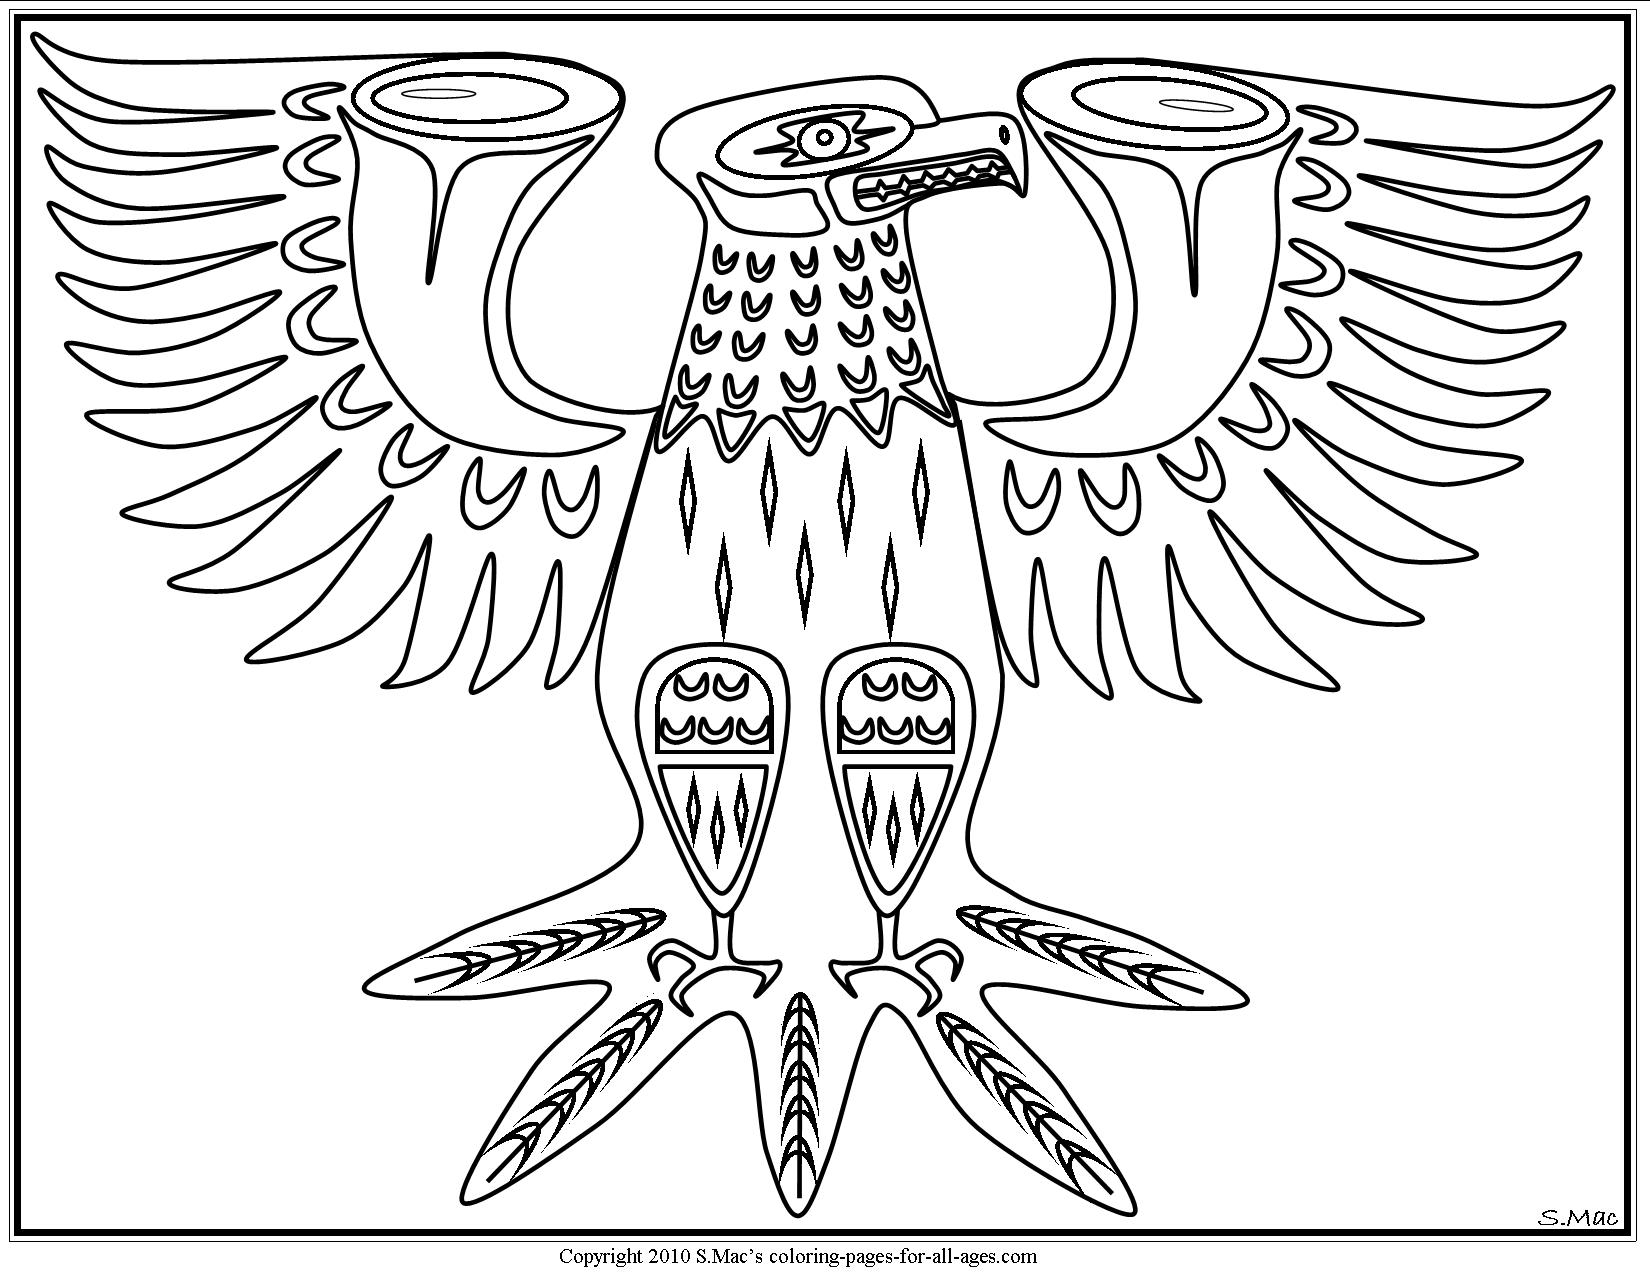 Pacific Northwest Native American Art Coloring Pages - S.Mac's Place to Be